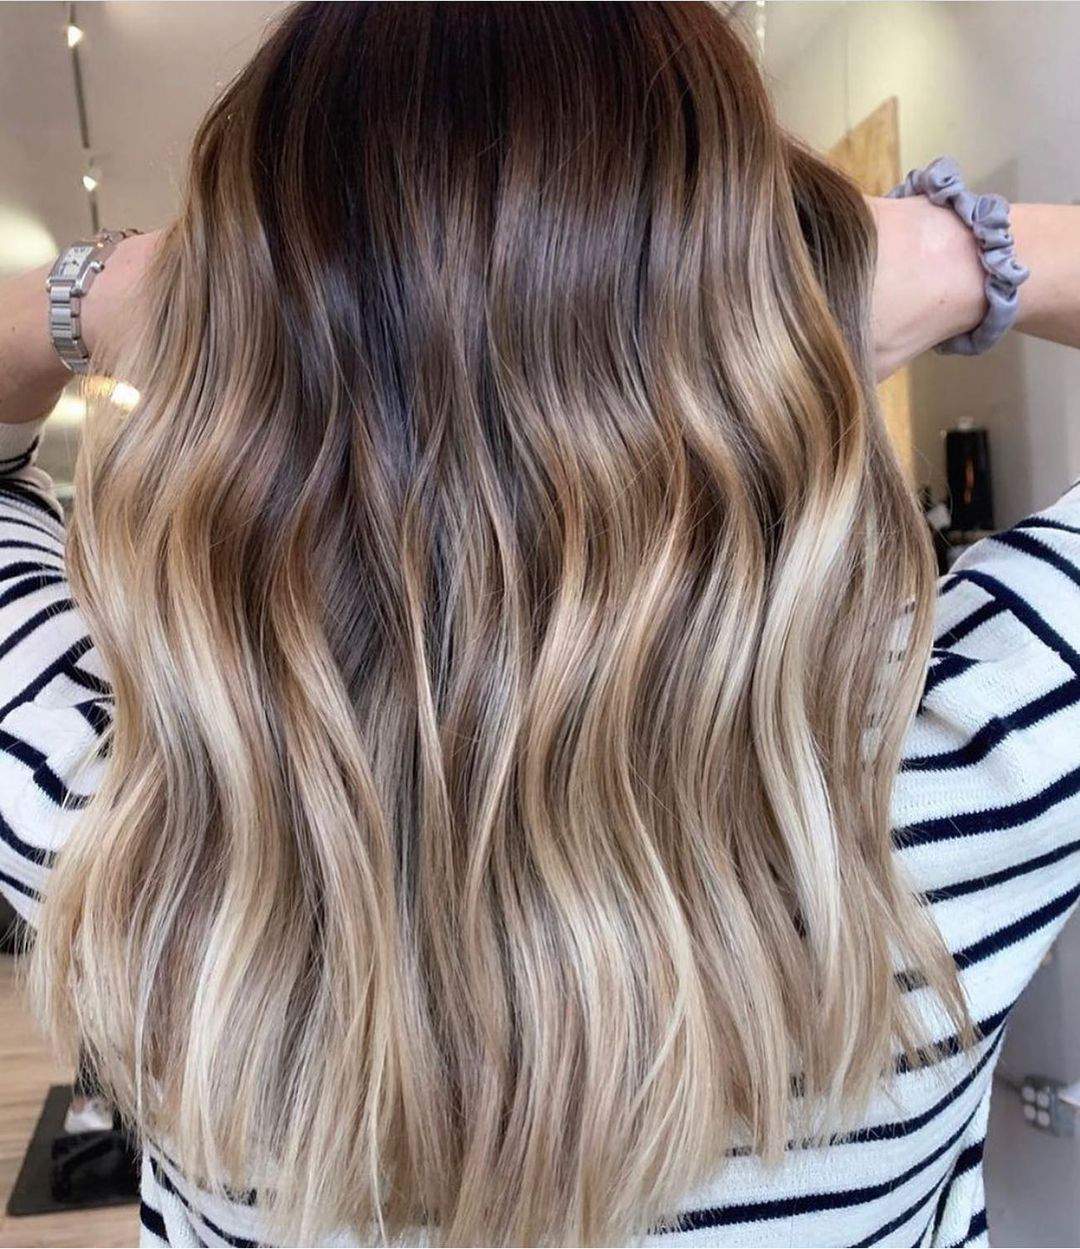 40 Greatest Long Hairstyles For Women With Long Hair In 2021 images 18